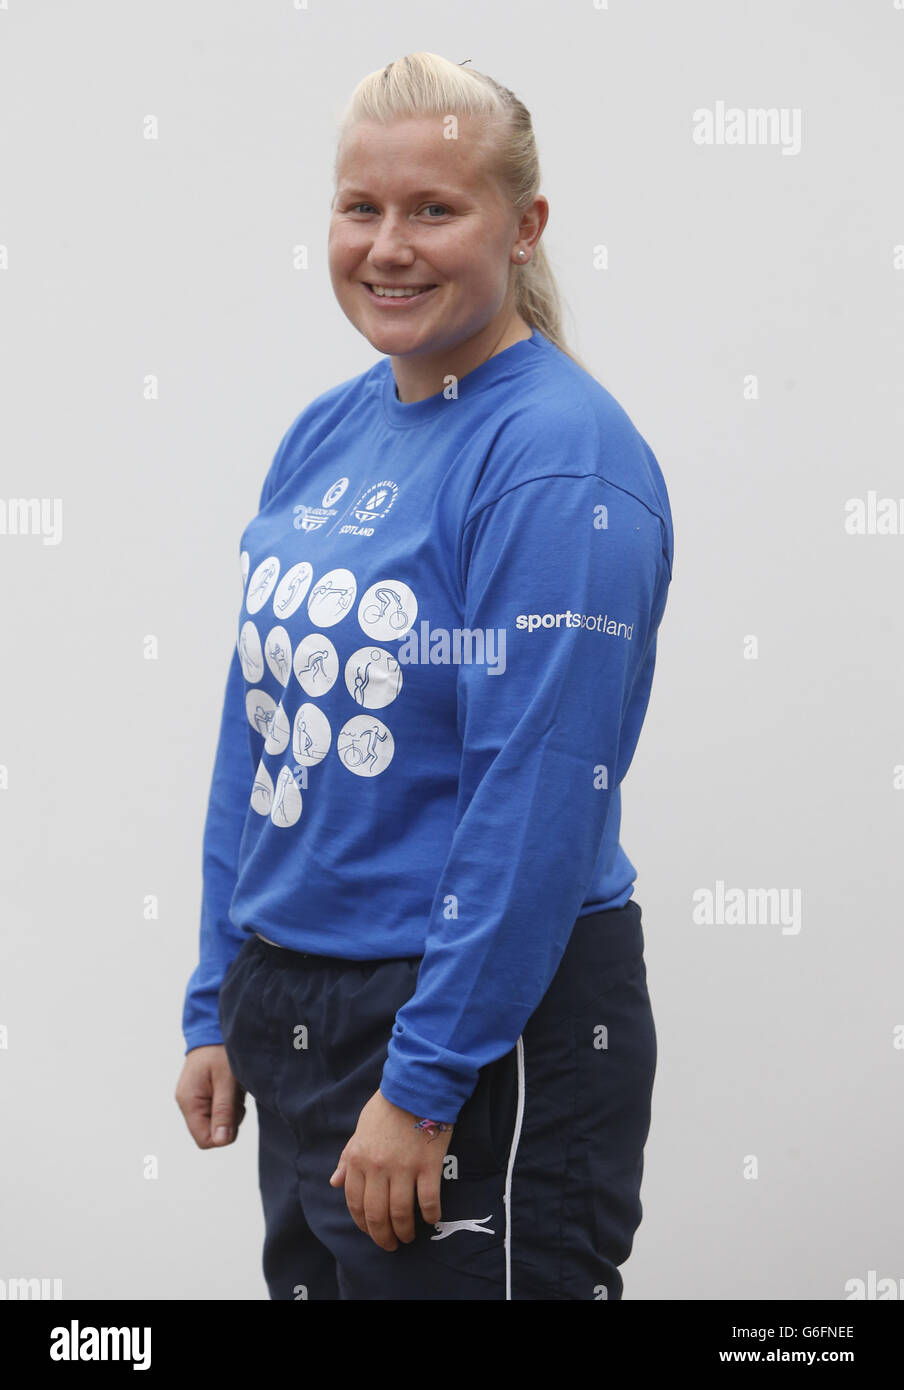 Susan McKelvie, Hammer, who has been selected to represent Team Scotland at the Glasgow 2014 Commonwealth Games, during a photocall at the People's Palace and Winter Gardens in Glasgow. PRESS ASSOCIATION Photo. Picture date: Wednesday September 25, 2013. A total of 27 sportsmen and women - 23 from athletics and four squash players - have been confirmed in Team Scotland as the countdown to the Games reaches the 300-days-to-go mark. See PA Story SPORT Commonwealth. Photo credit should read: Danny Lawson/PA Wire. Stock Photo